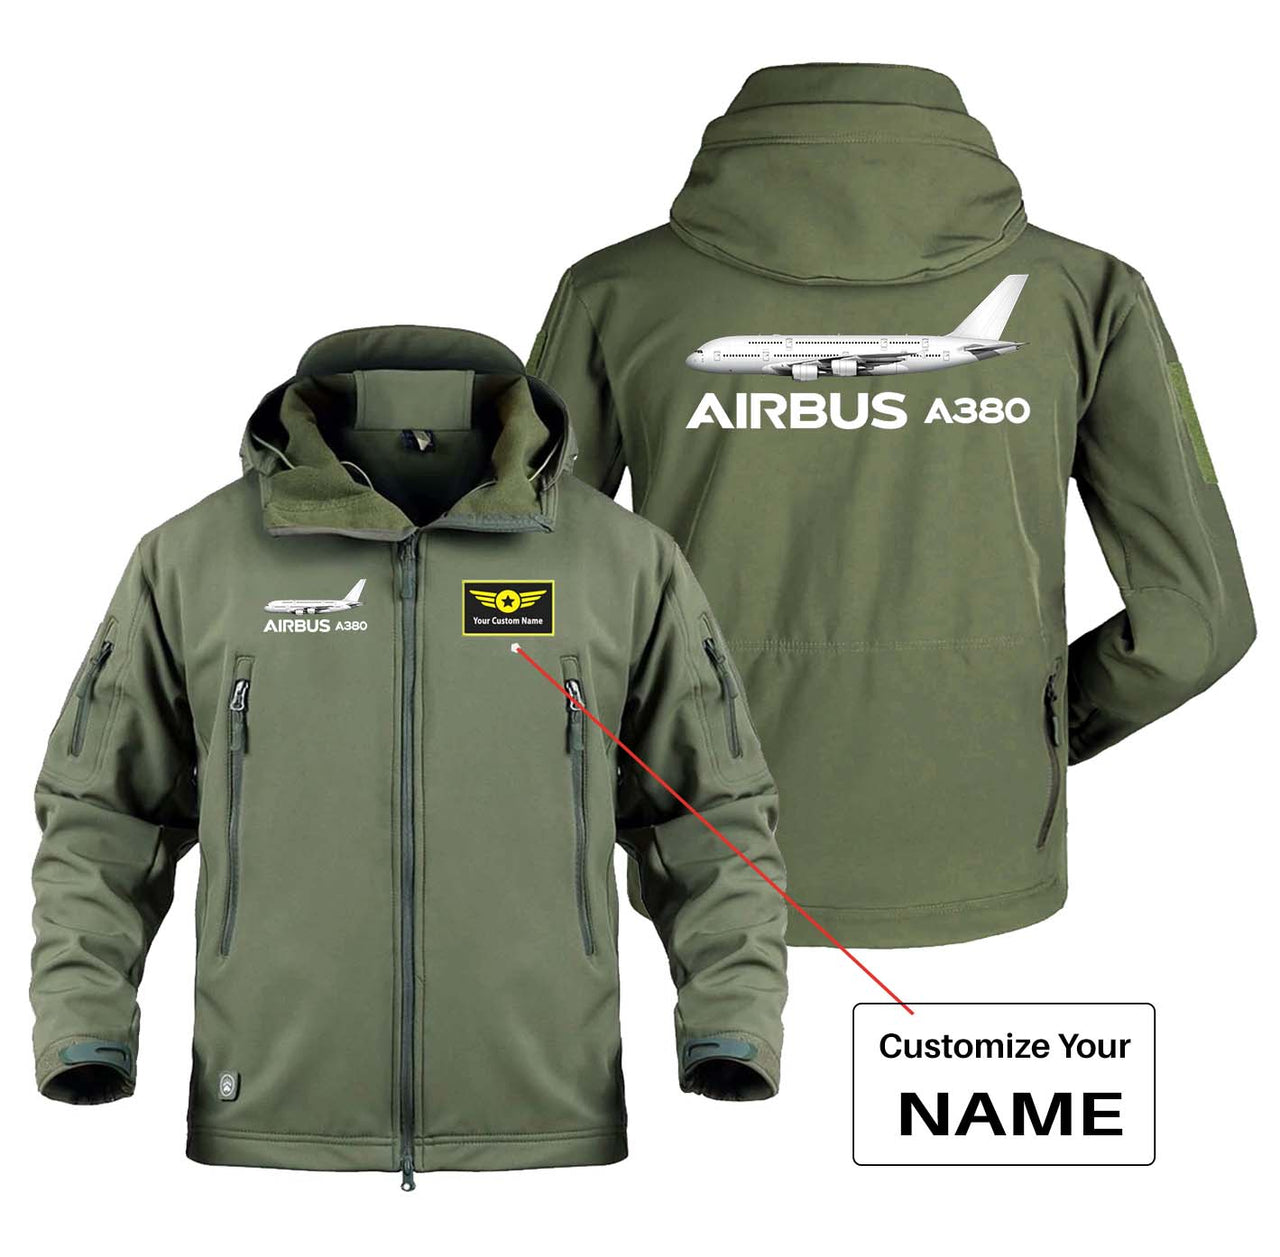 The Airbus A380 Designed Military Jackets (Customizable)